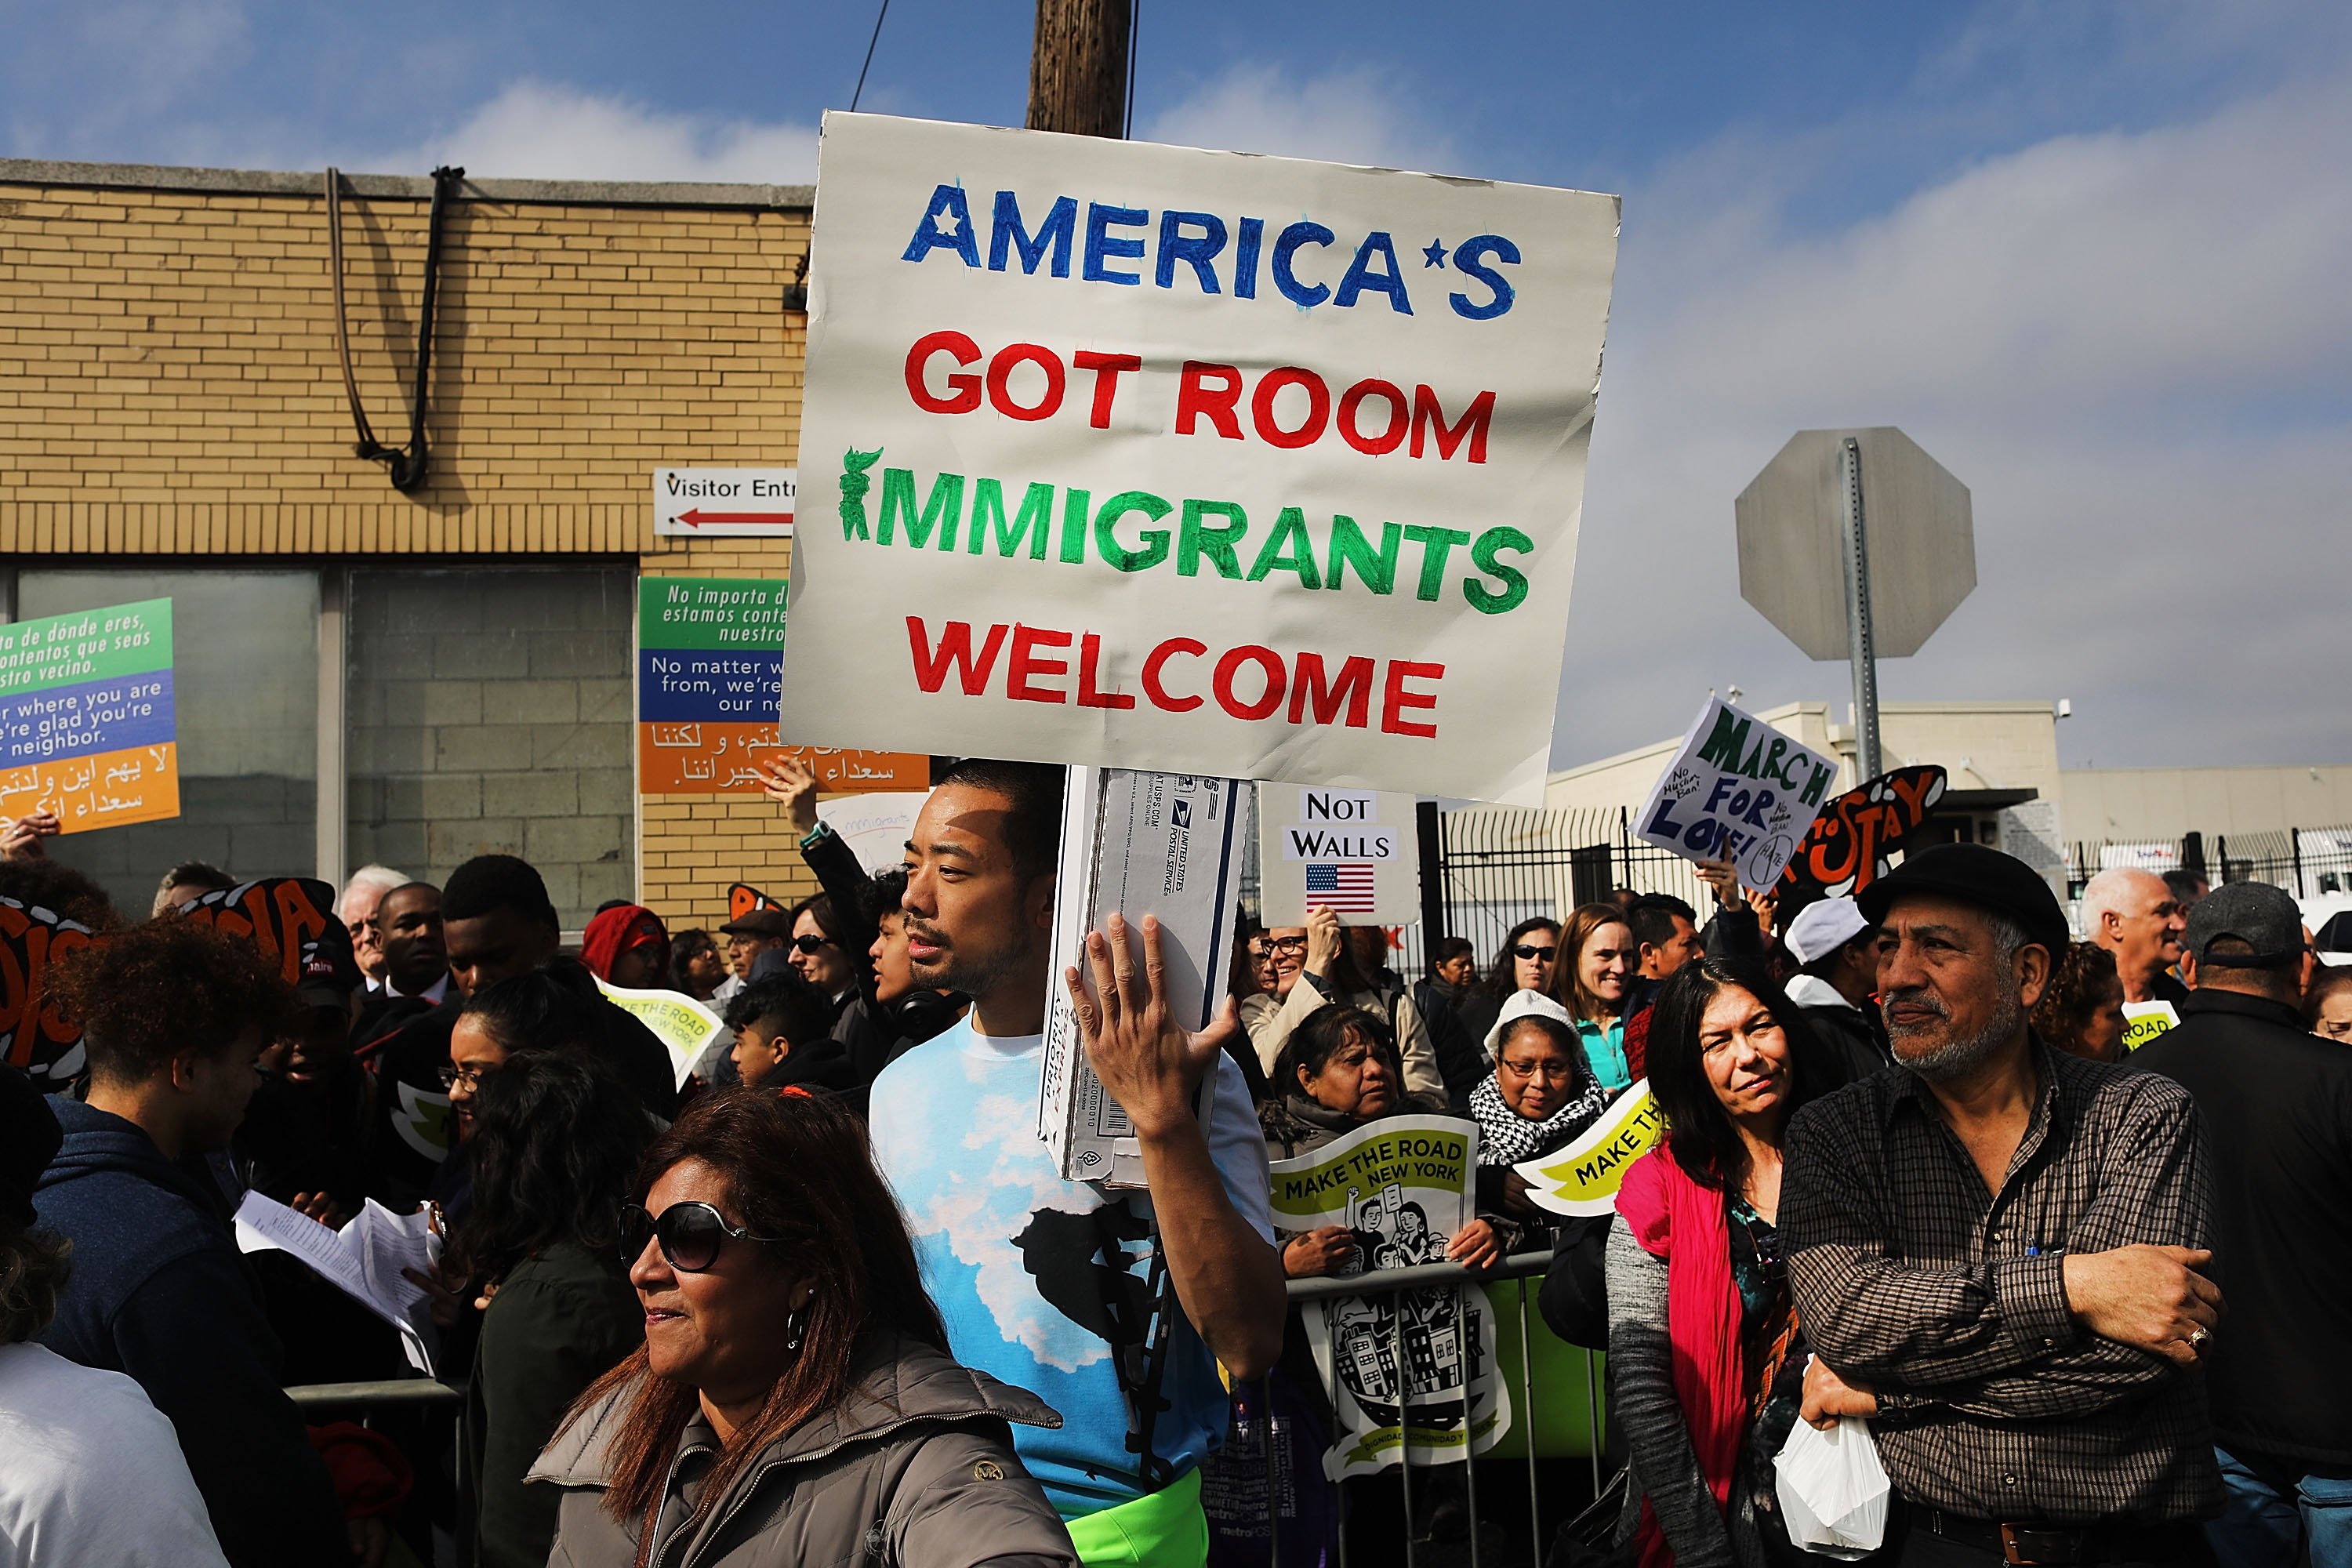 People protest outside of the Elizabeth Detention Center during a rally attended by immigrant residents and activists on February 23, 2017 in Elizabeth, New Jersey. Over 100 demonstrators chanted and held up signs outside of the center which is currently holding people awaiting deportation. The demonstrators, five of whom were arrested, denounced President Donald Trump and his deportation policies. Around the country stories of Immigration and Customs Enforcement (ICE) raids have sent fear through immigrant communities. (Photo by Spencer Platt/Getty Images)